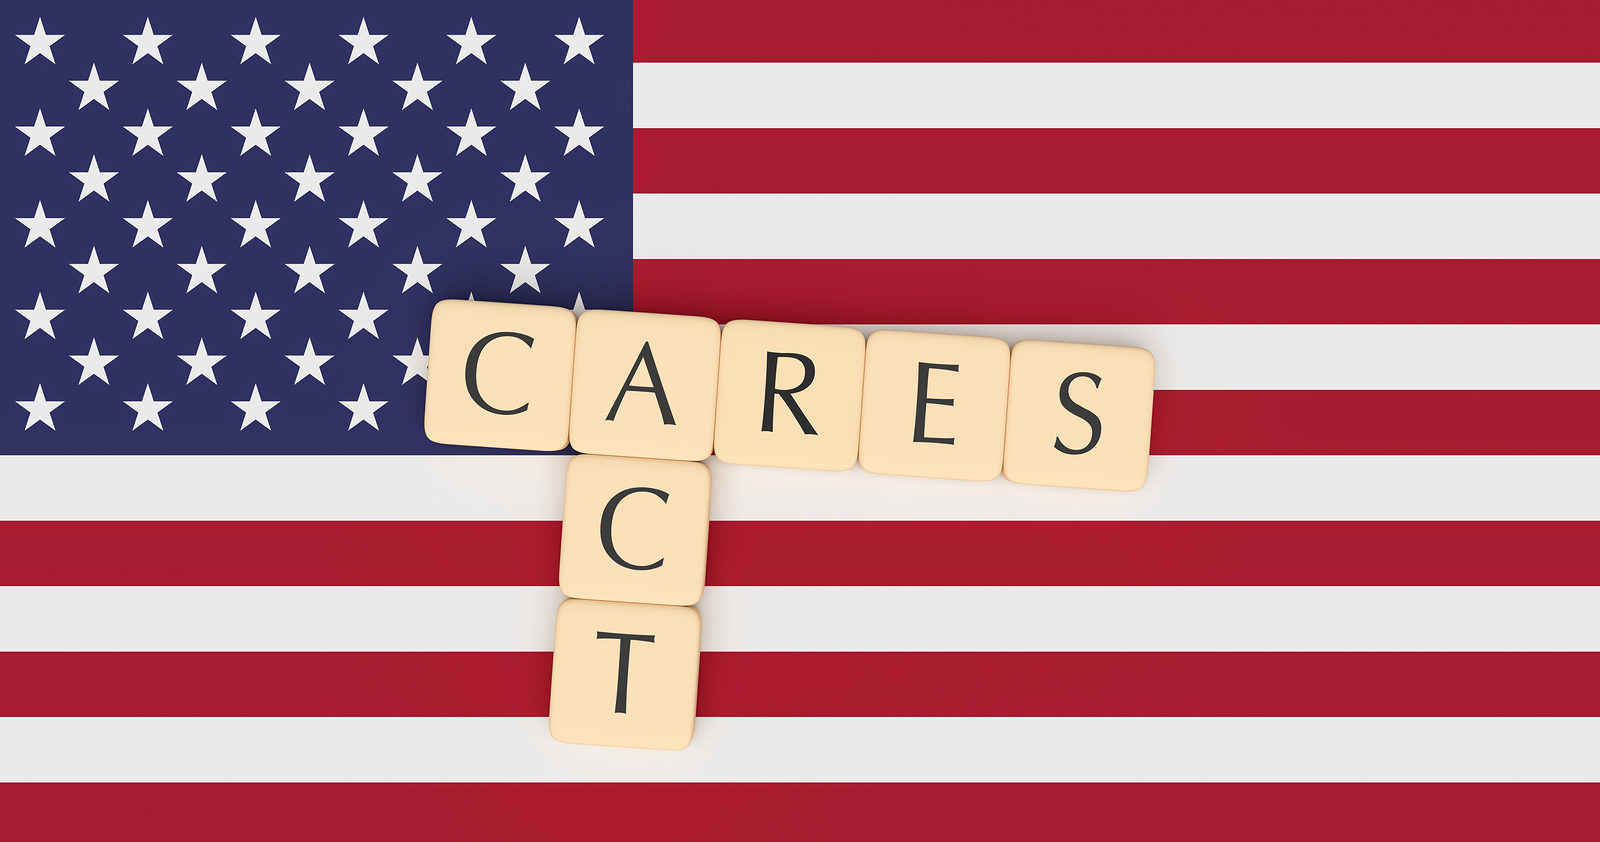 The CARES Act